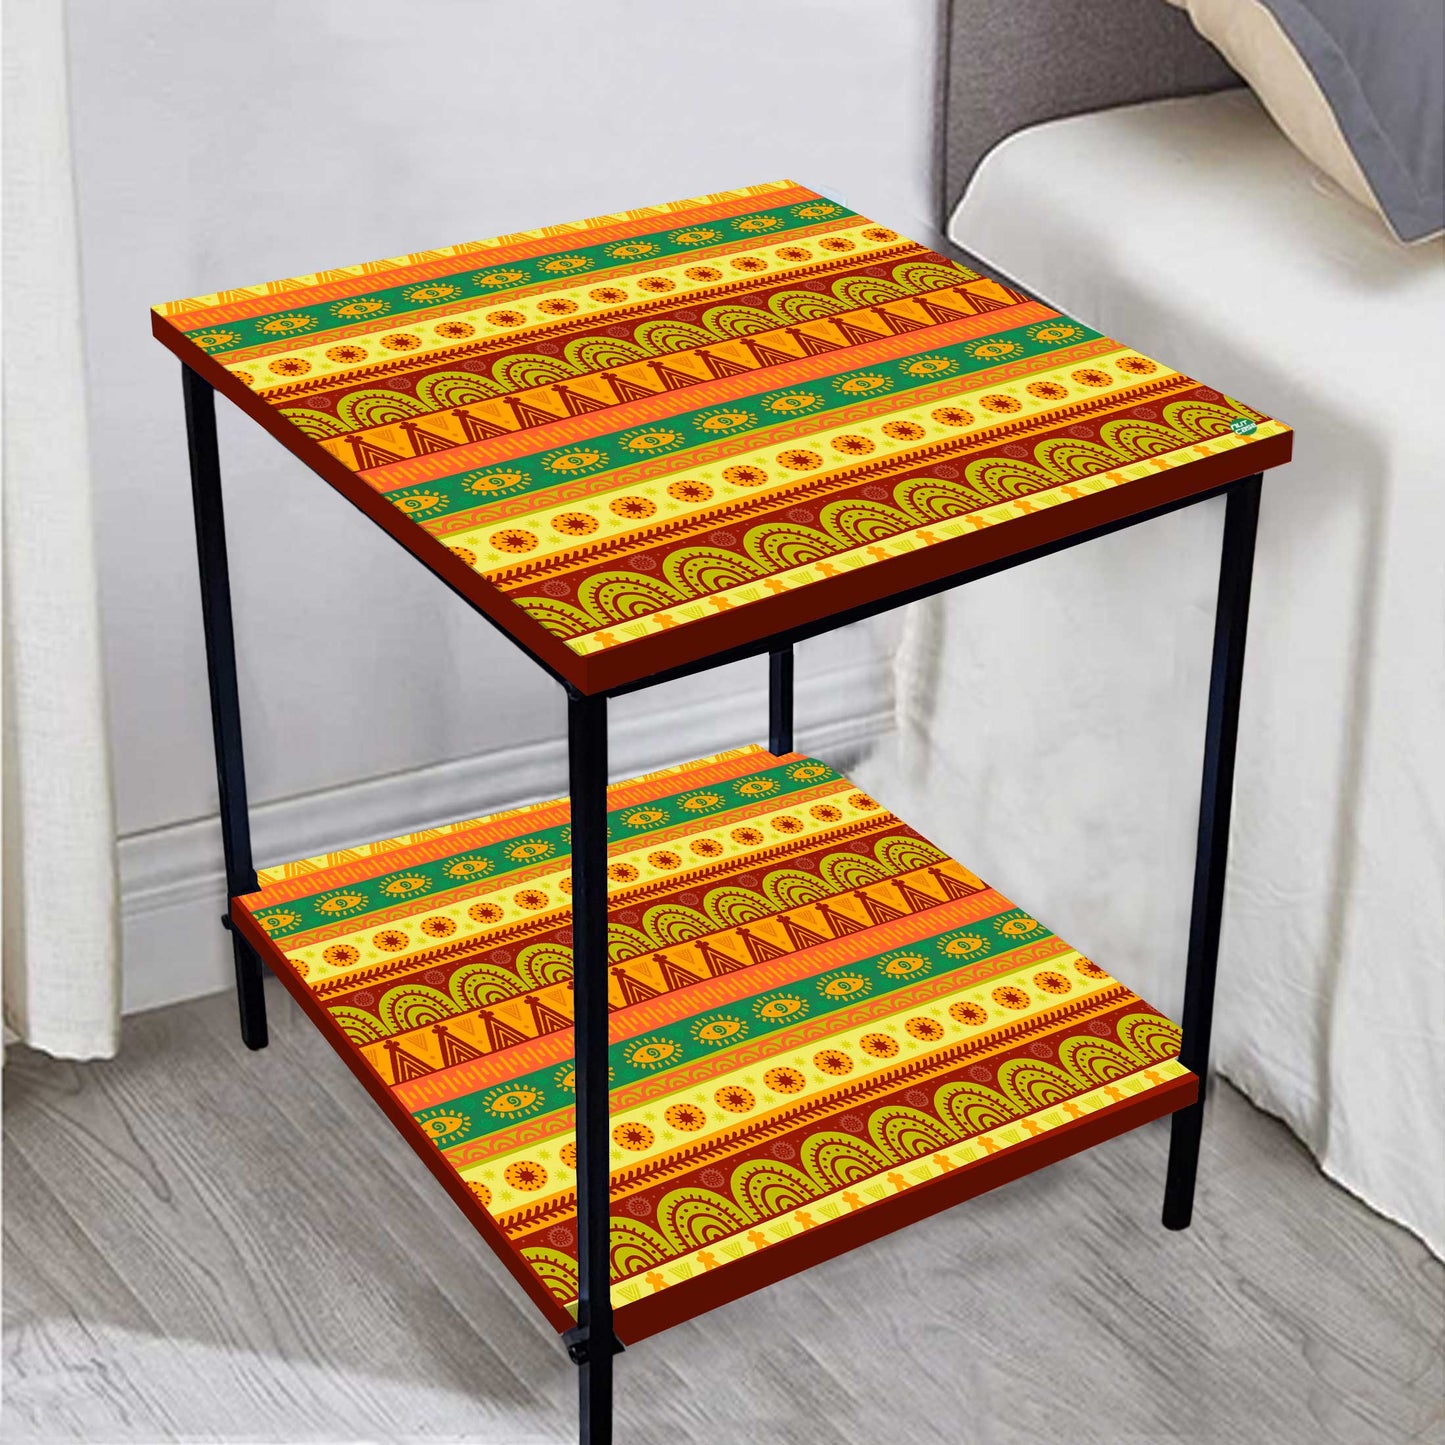 Luxury Bedside Table Organizer for Living Room - AZTEC Nutcase